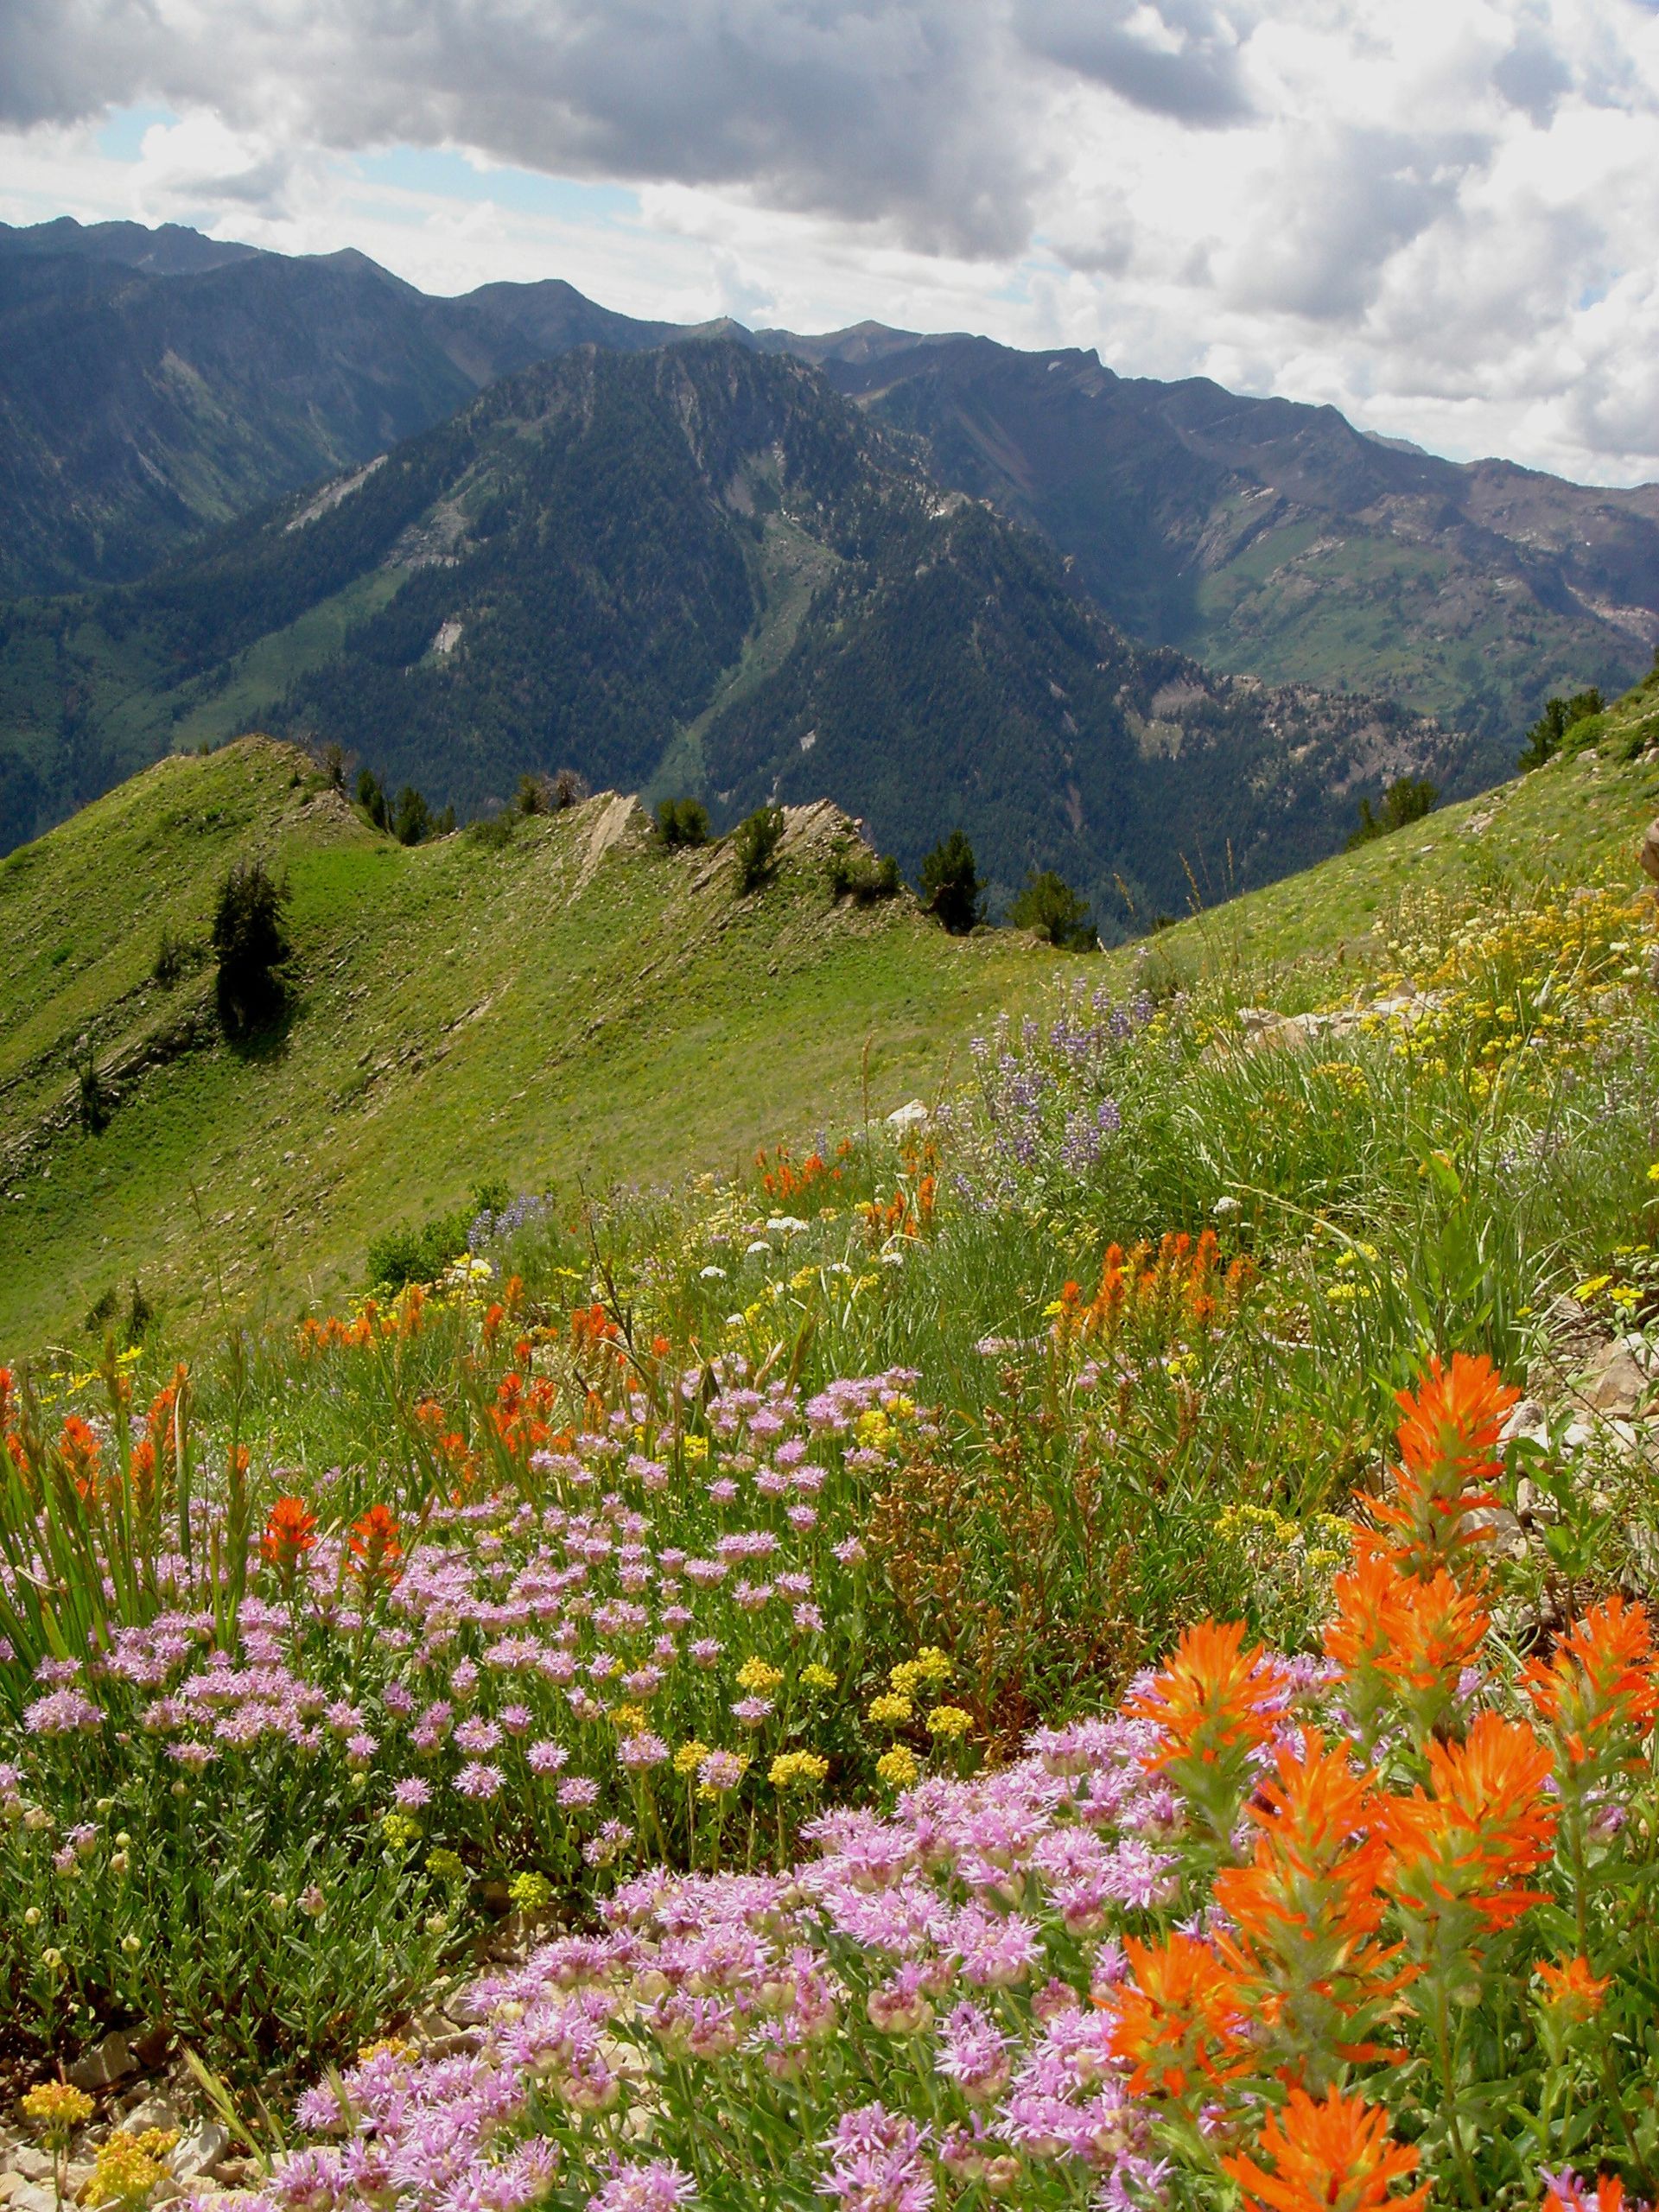 A landscape image of flowers in a meadow surrounded by mountains.